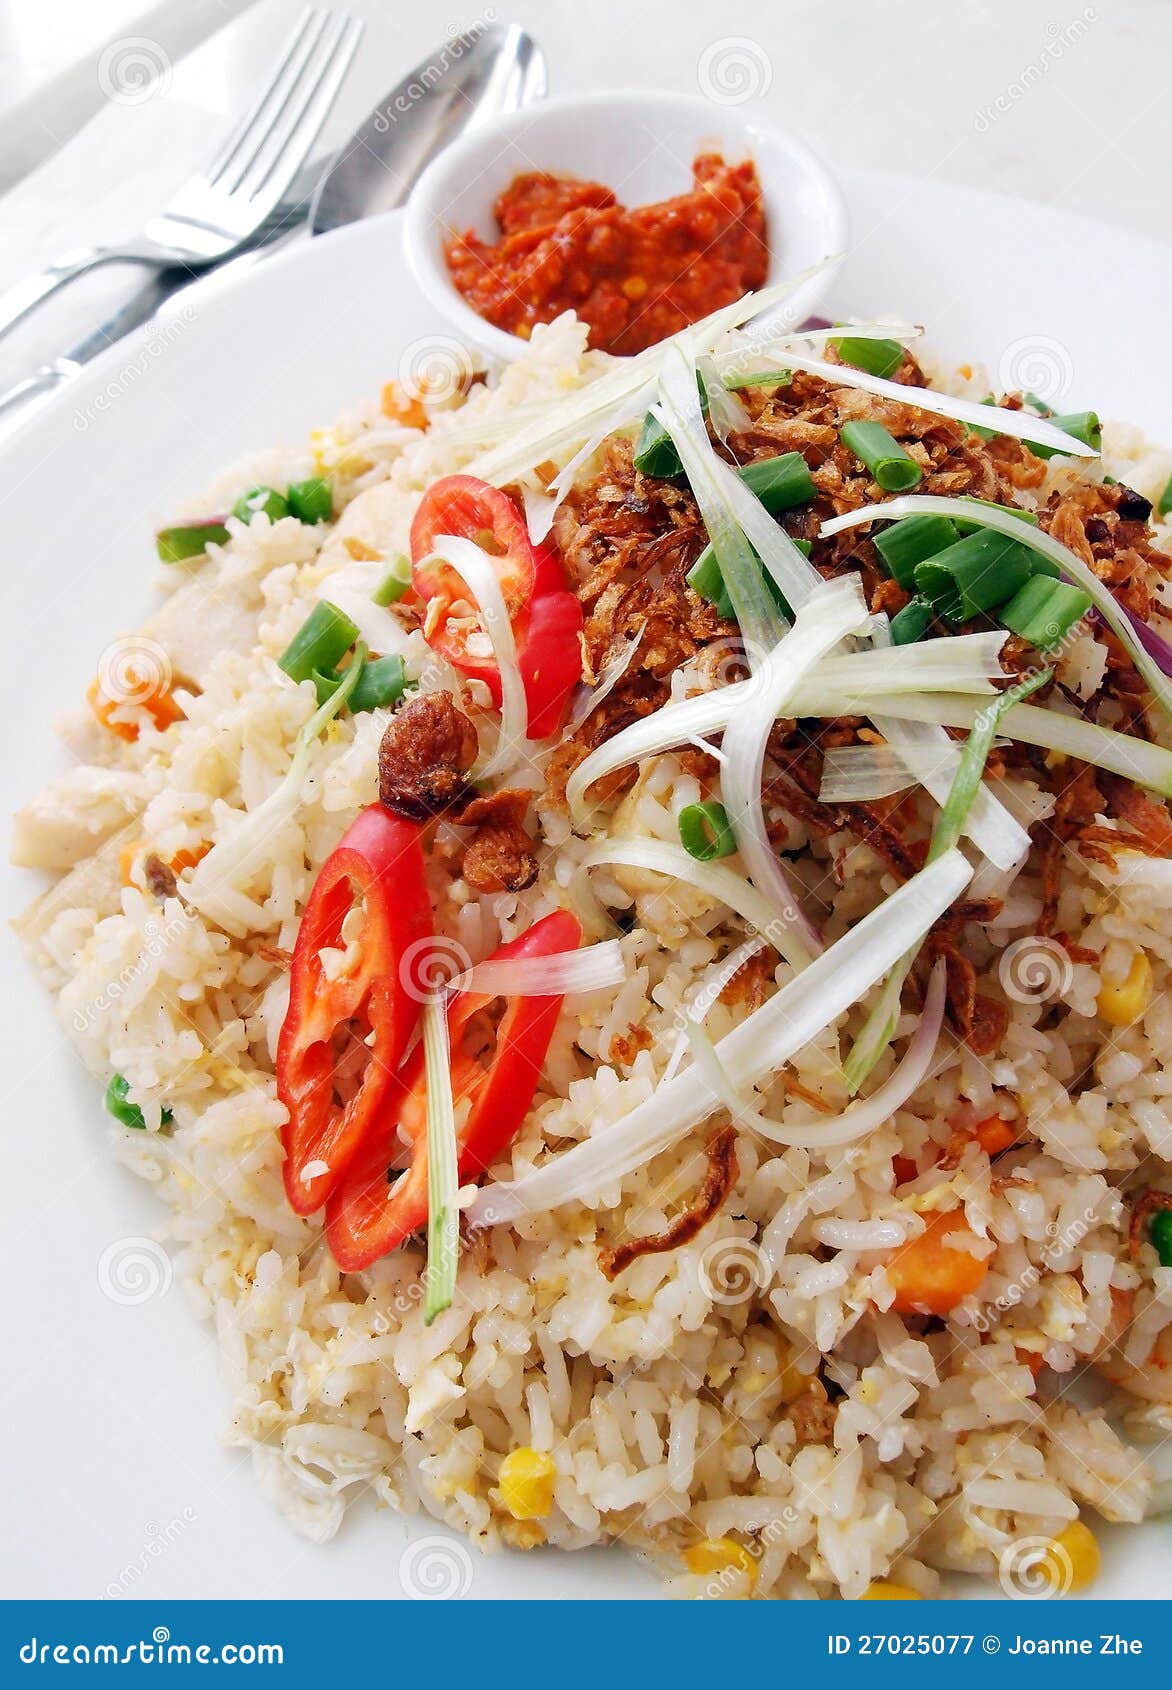 fried rice, asian style fry rice